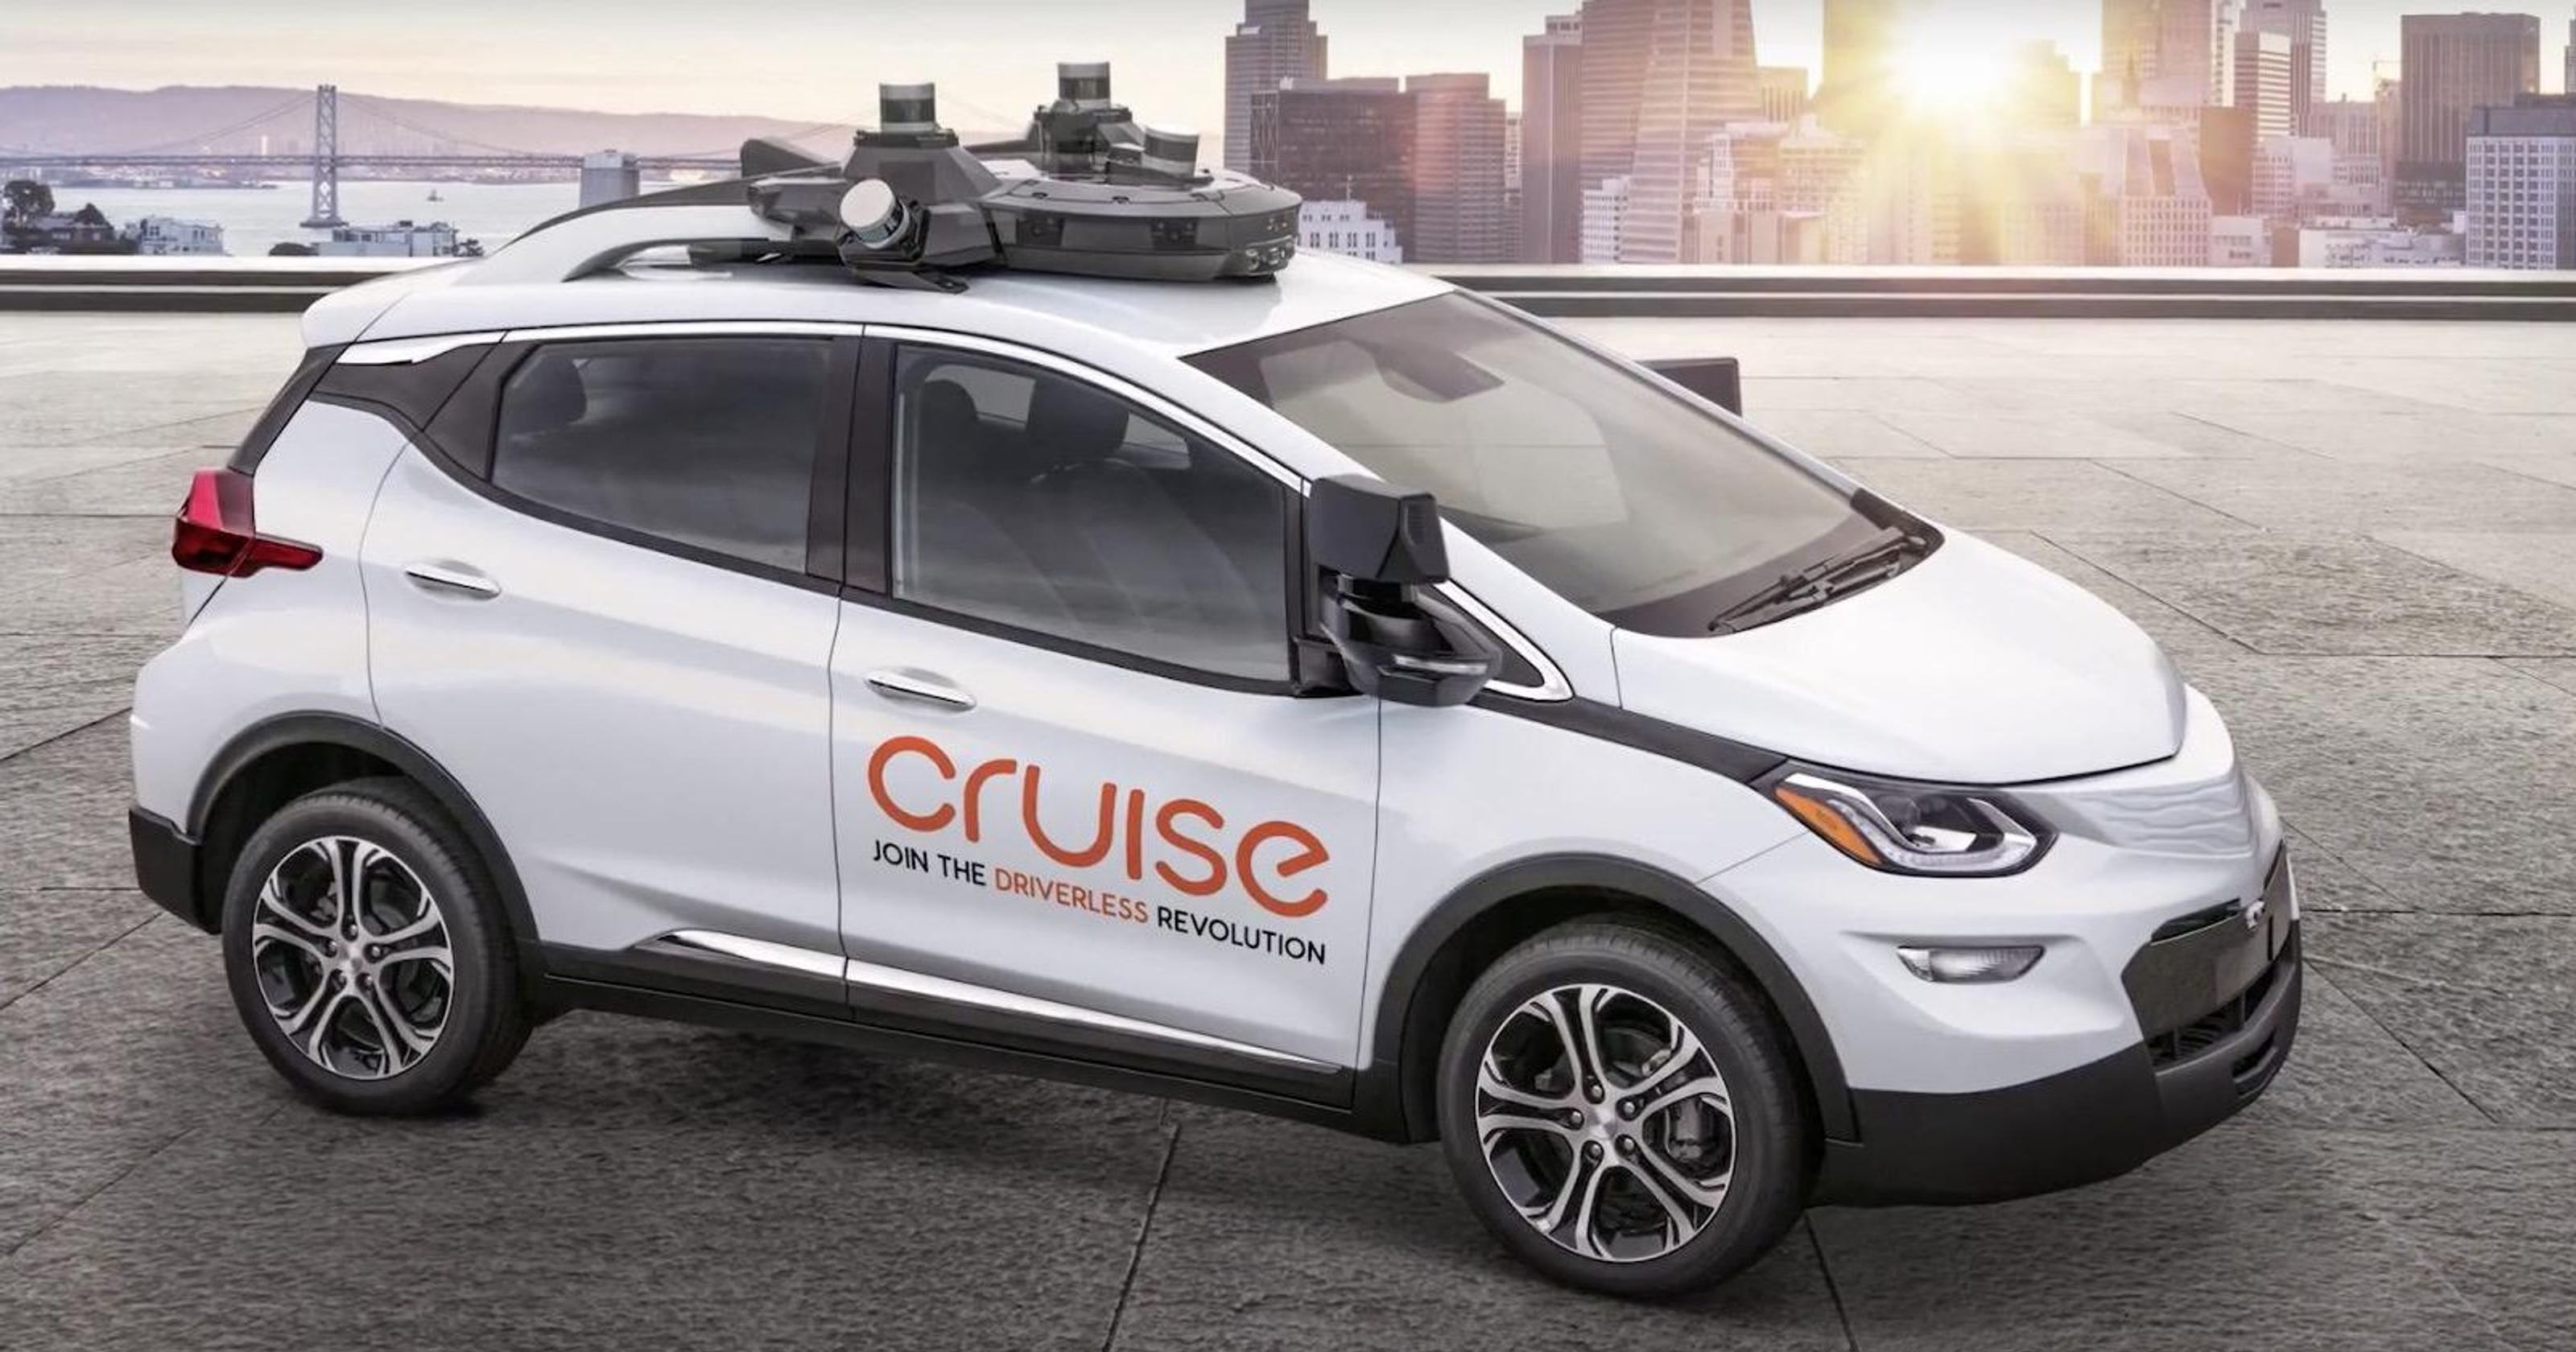 SoftBank to Invest $2.25 Billion in GM’s Self-Driving Unit — Cruise